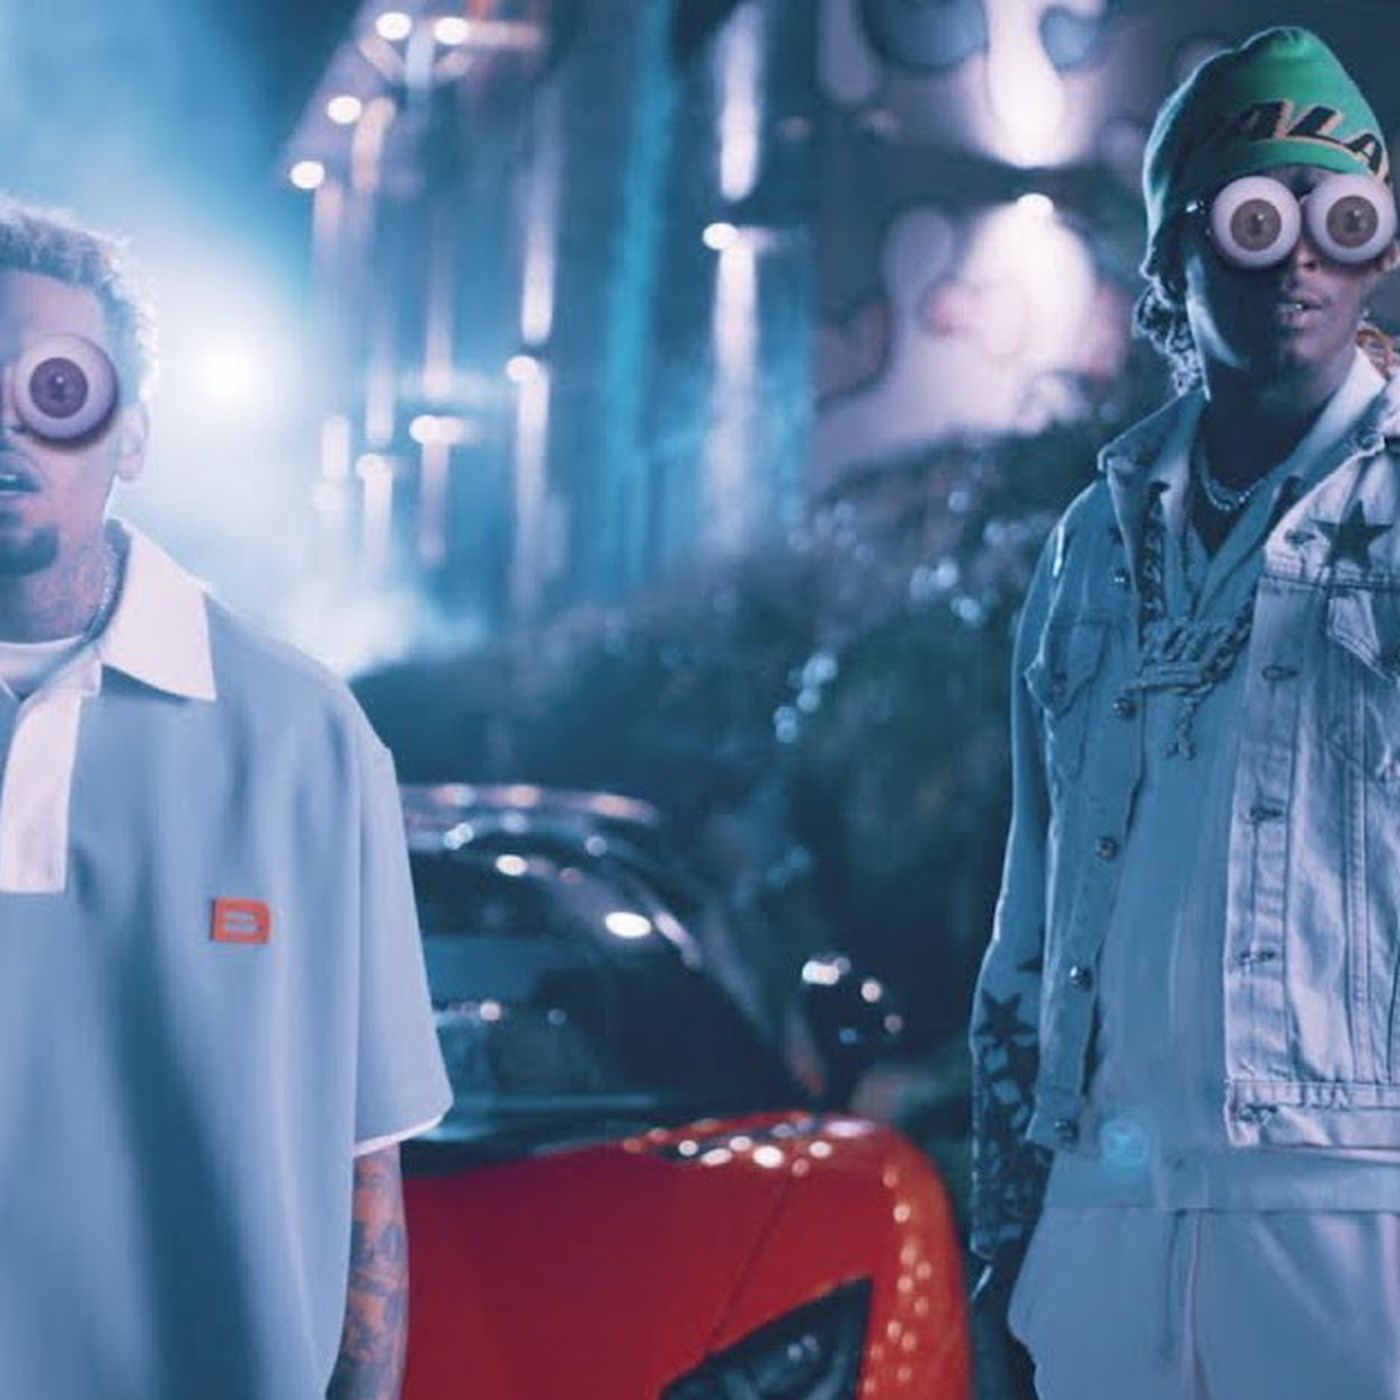 Chris Brown and Young Thug “Go Crazy” in new visual